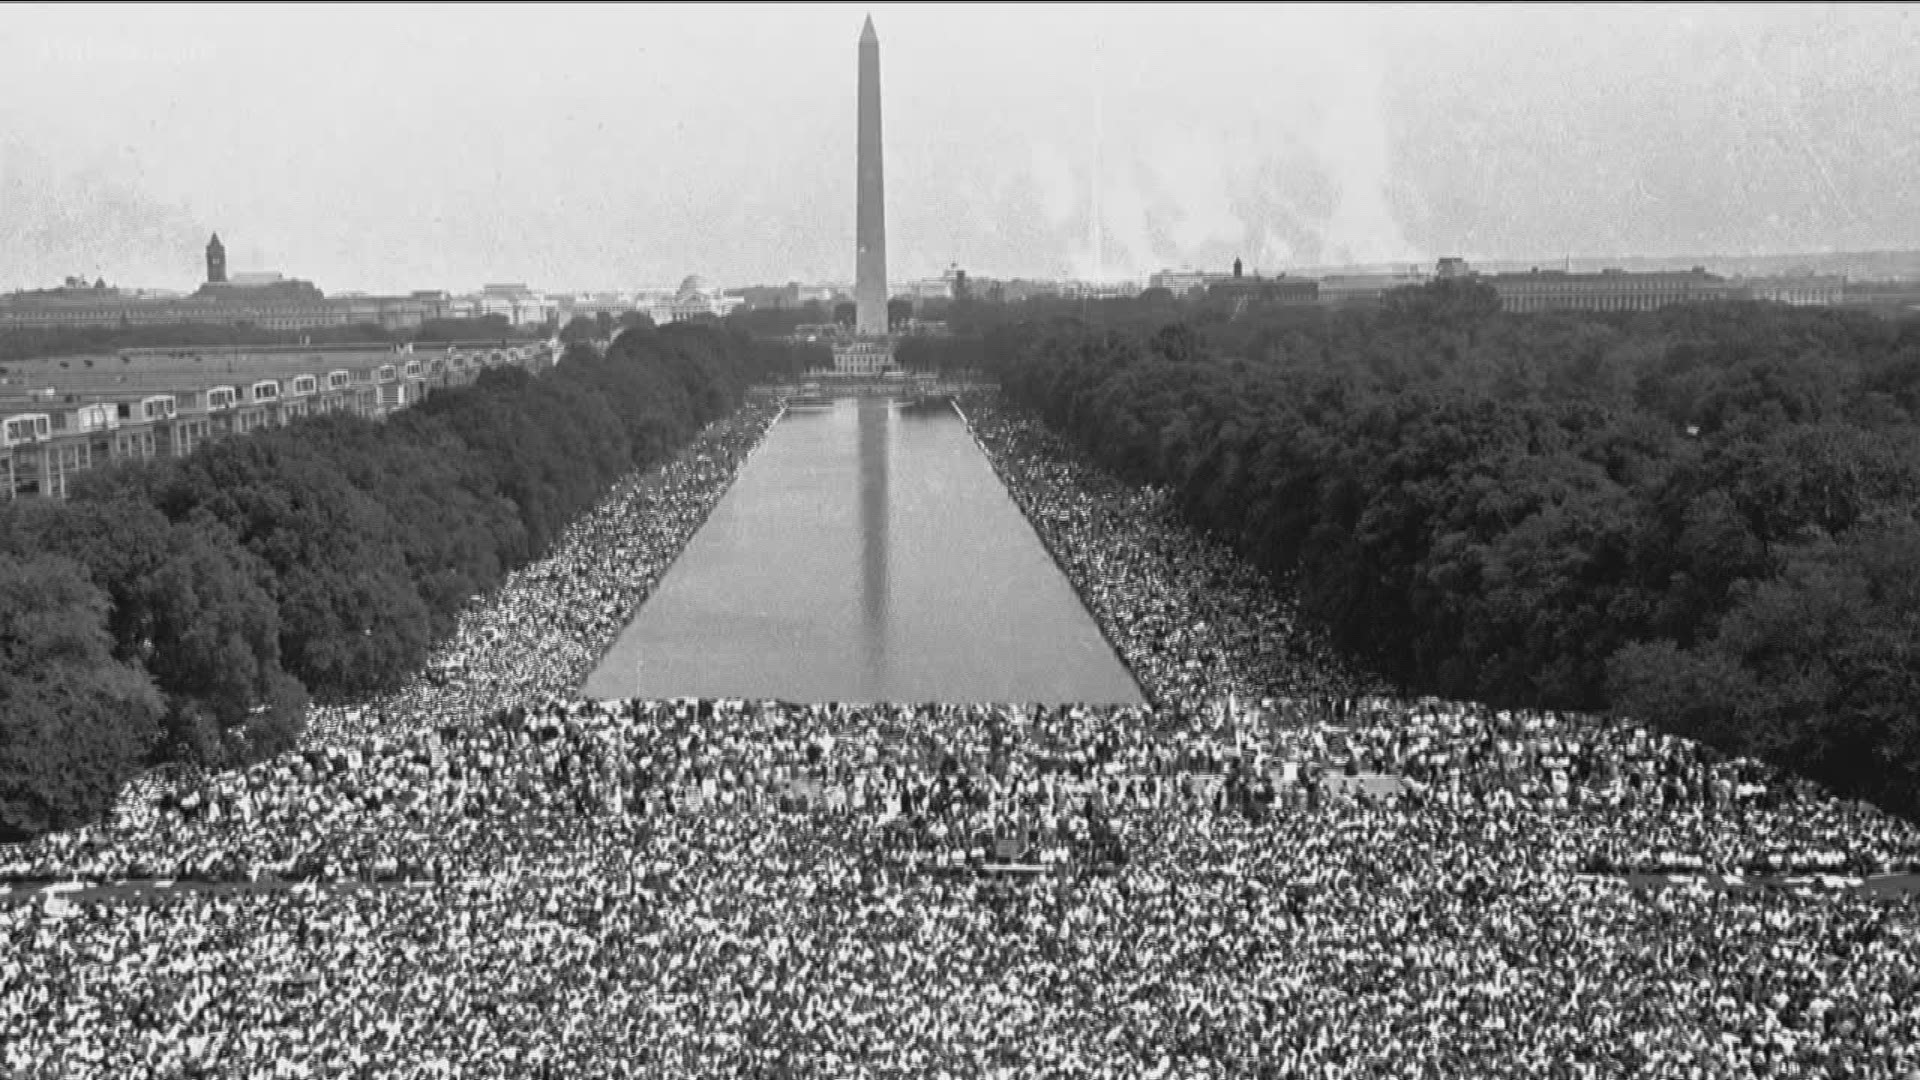 The march culminated with Dr. Martin Luther King's "I have a dream" speech